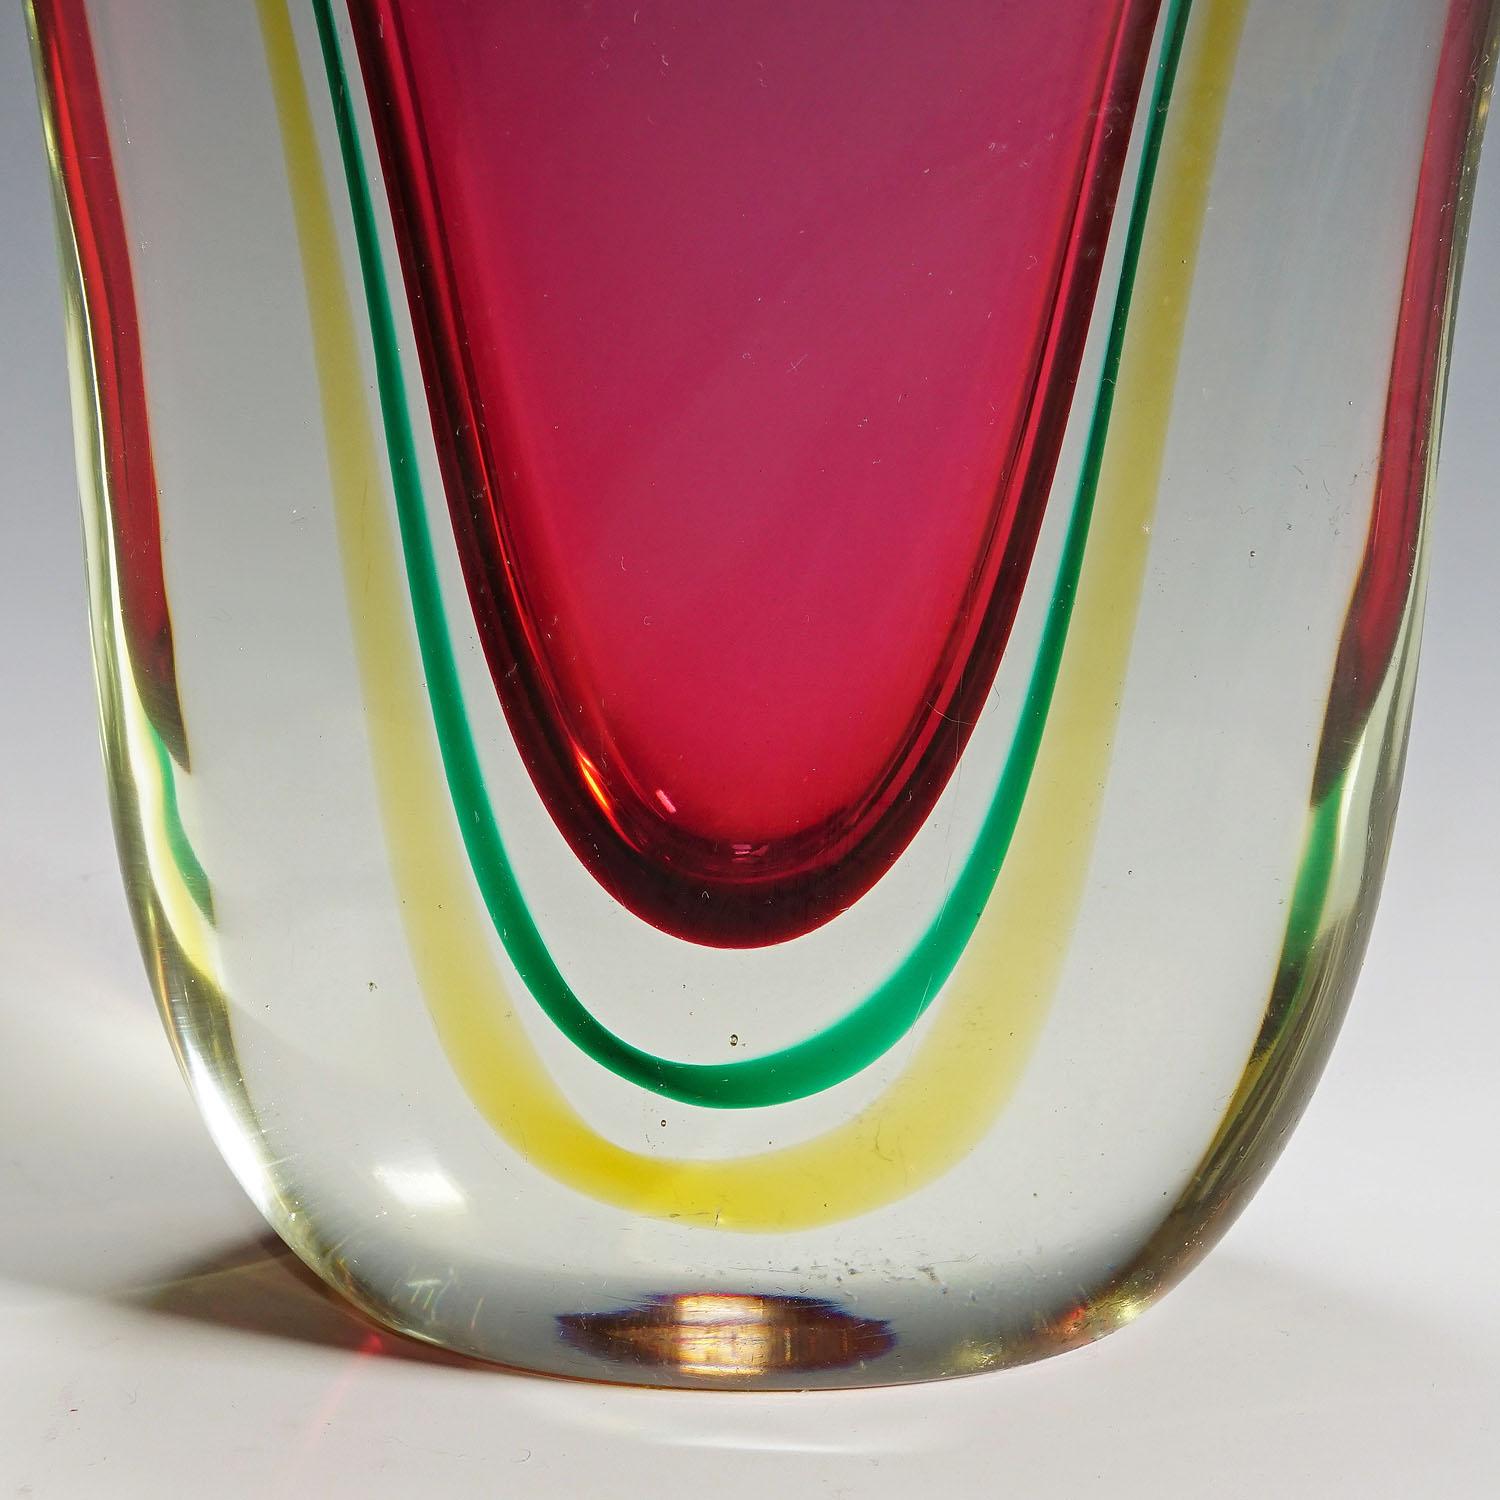 Hand-Crafted Midcentury Murano Sommerso Art Glass Vase by C.O.V.E.M, 1960s For Sale